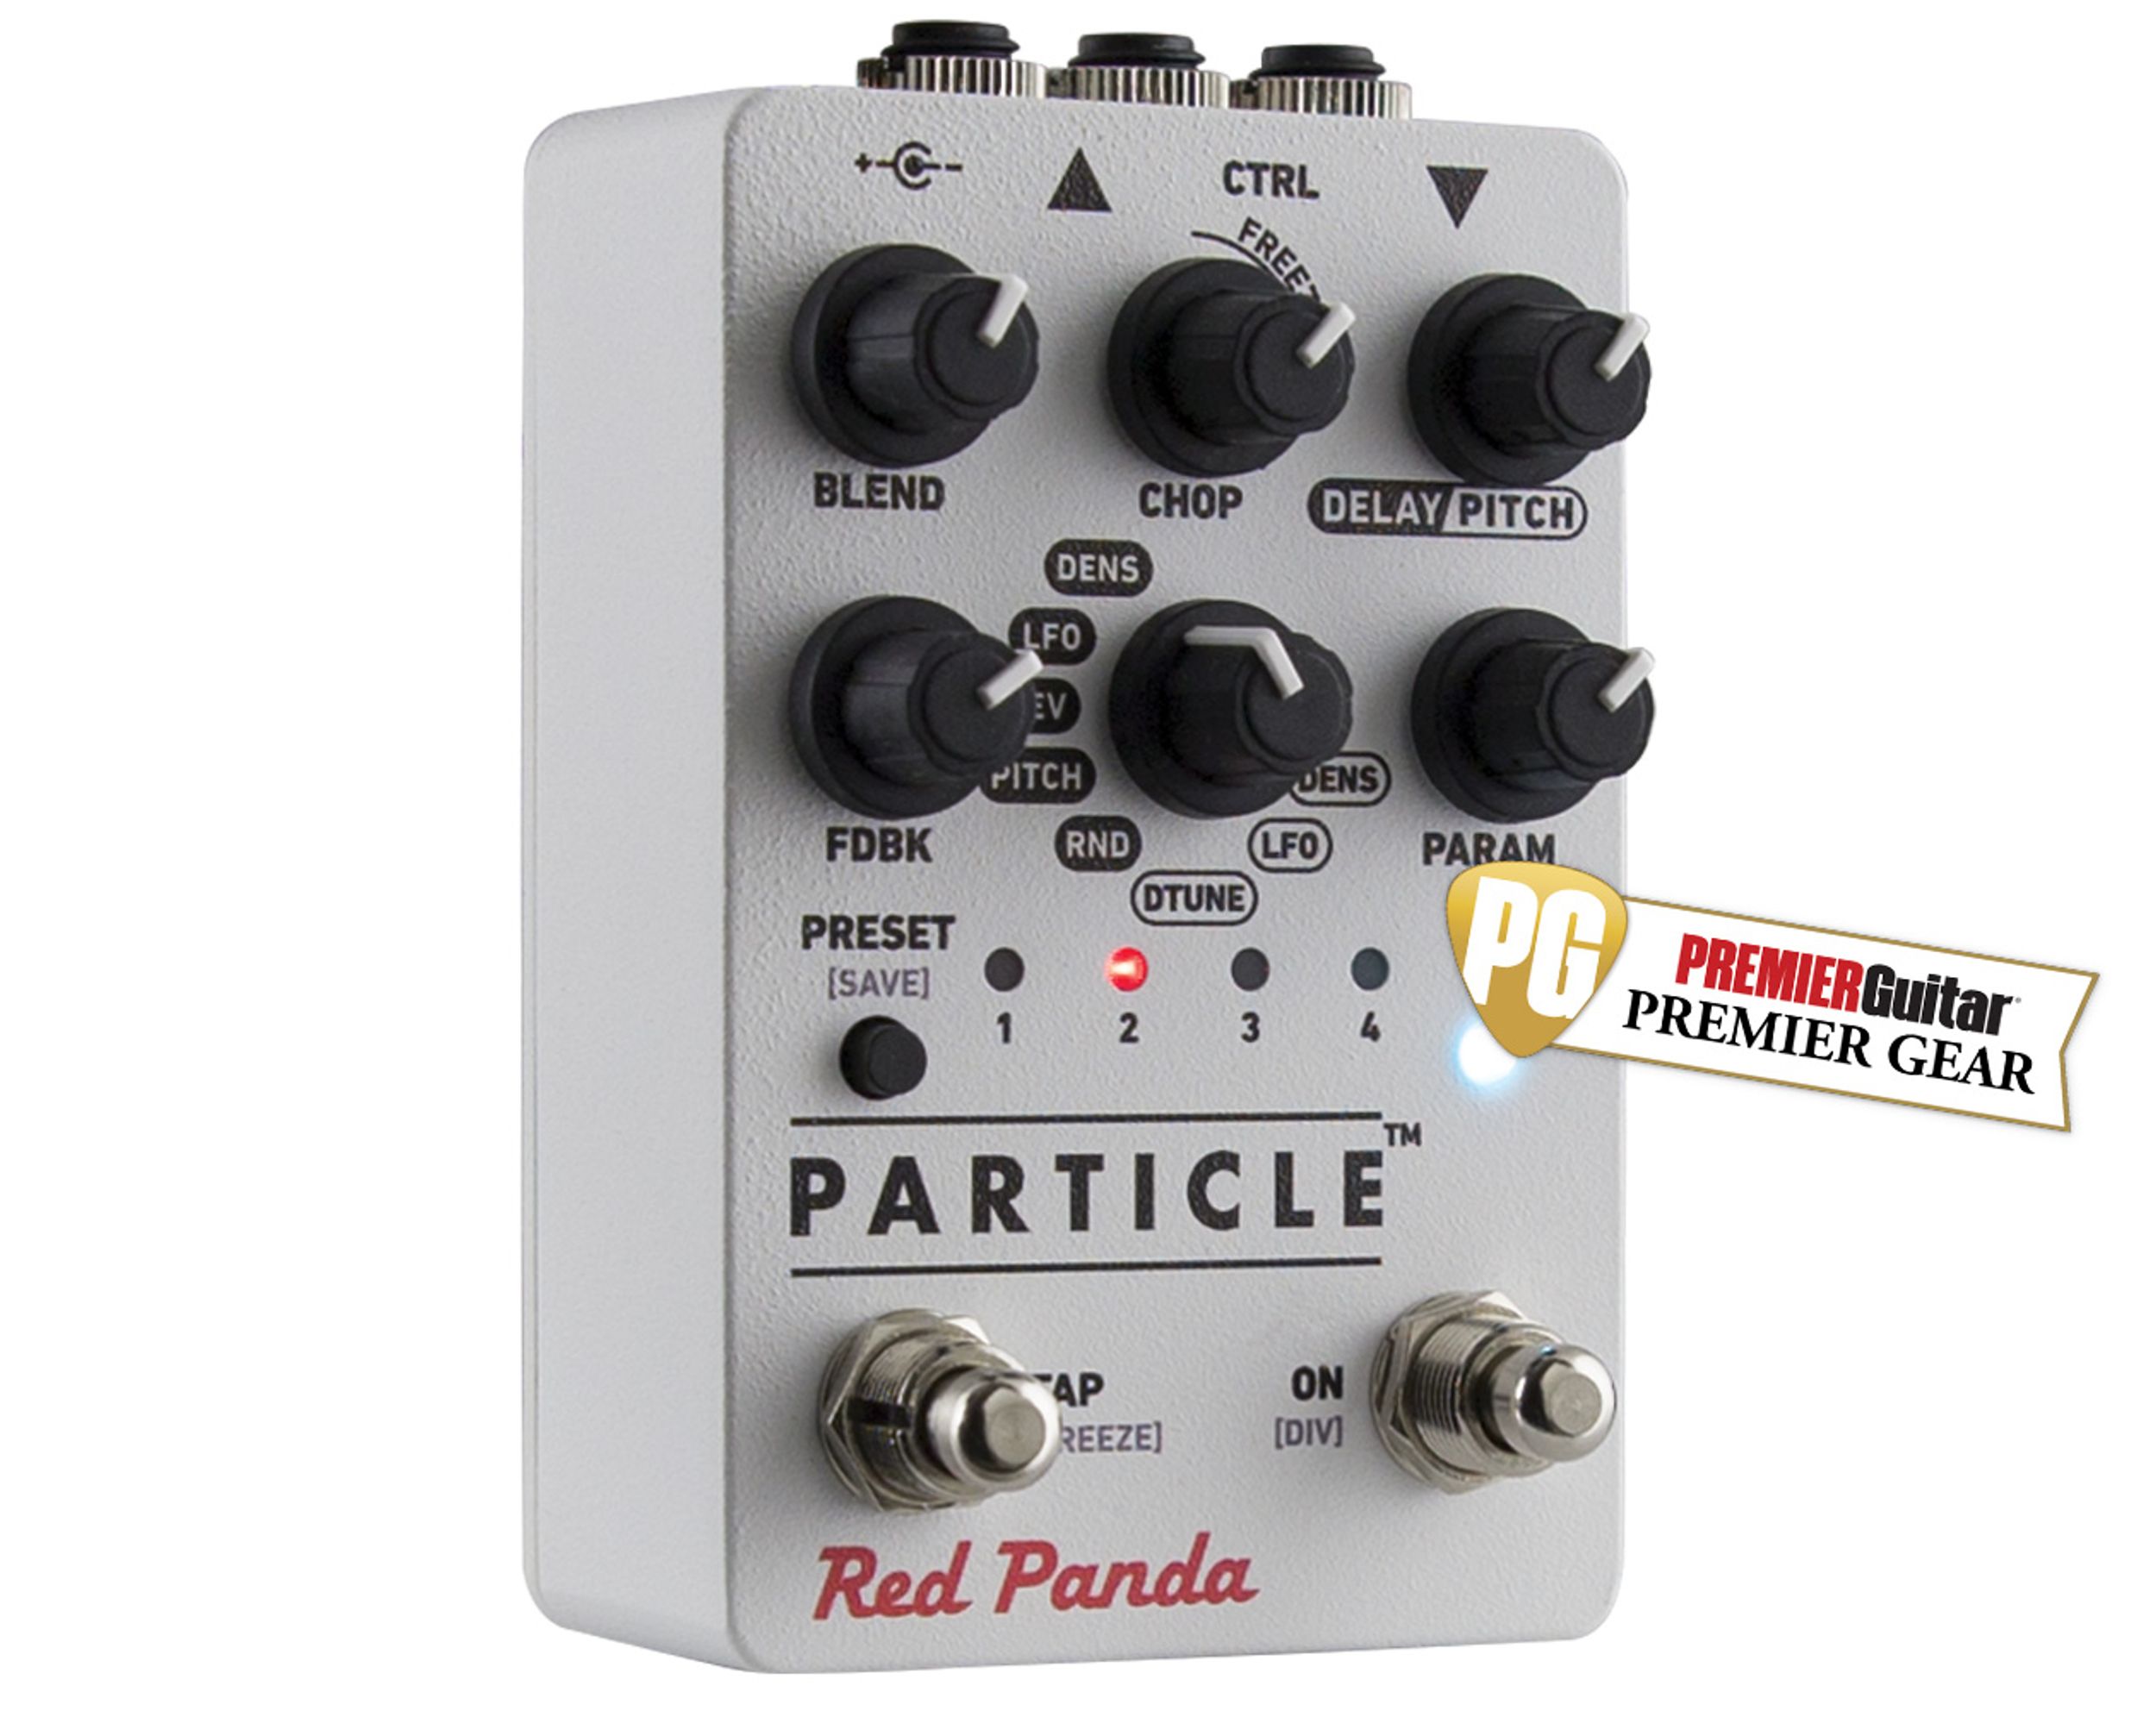 Red Panda Particle 2 Review